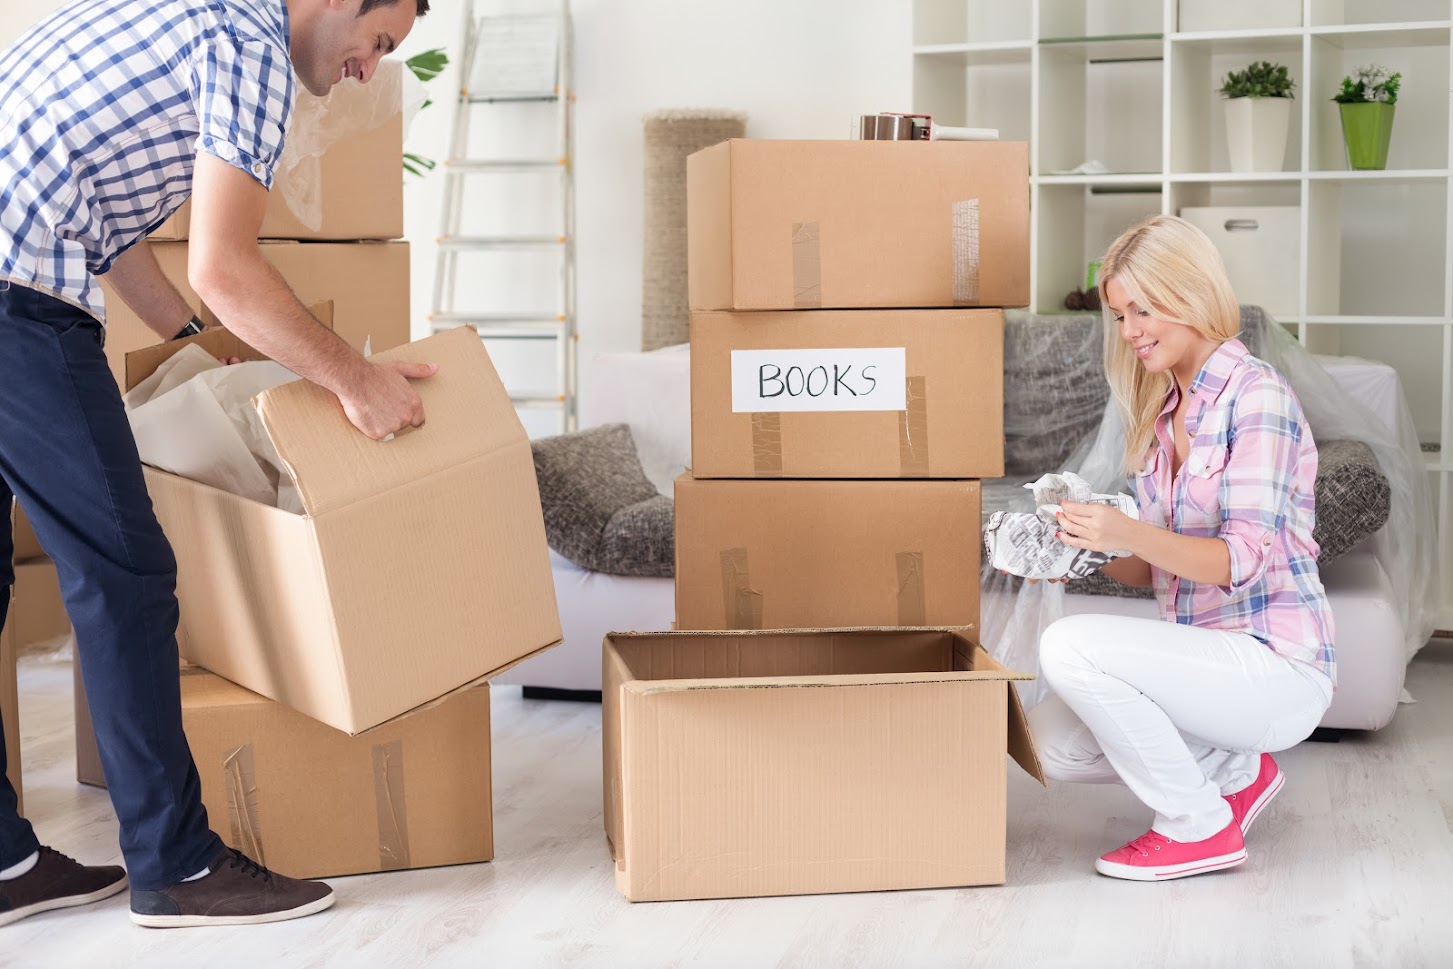 7 Life Events That Are Less Stressful With Self-Storage